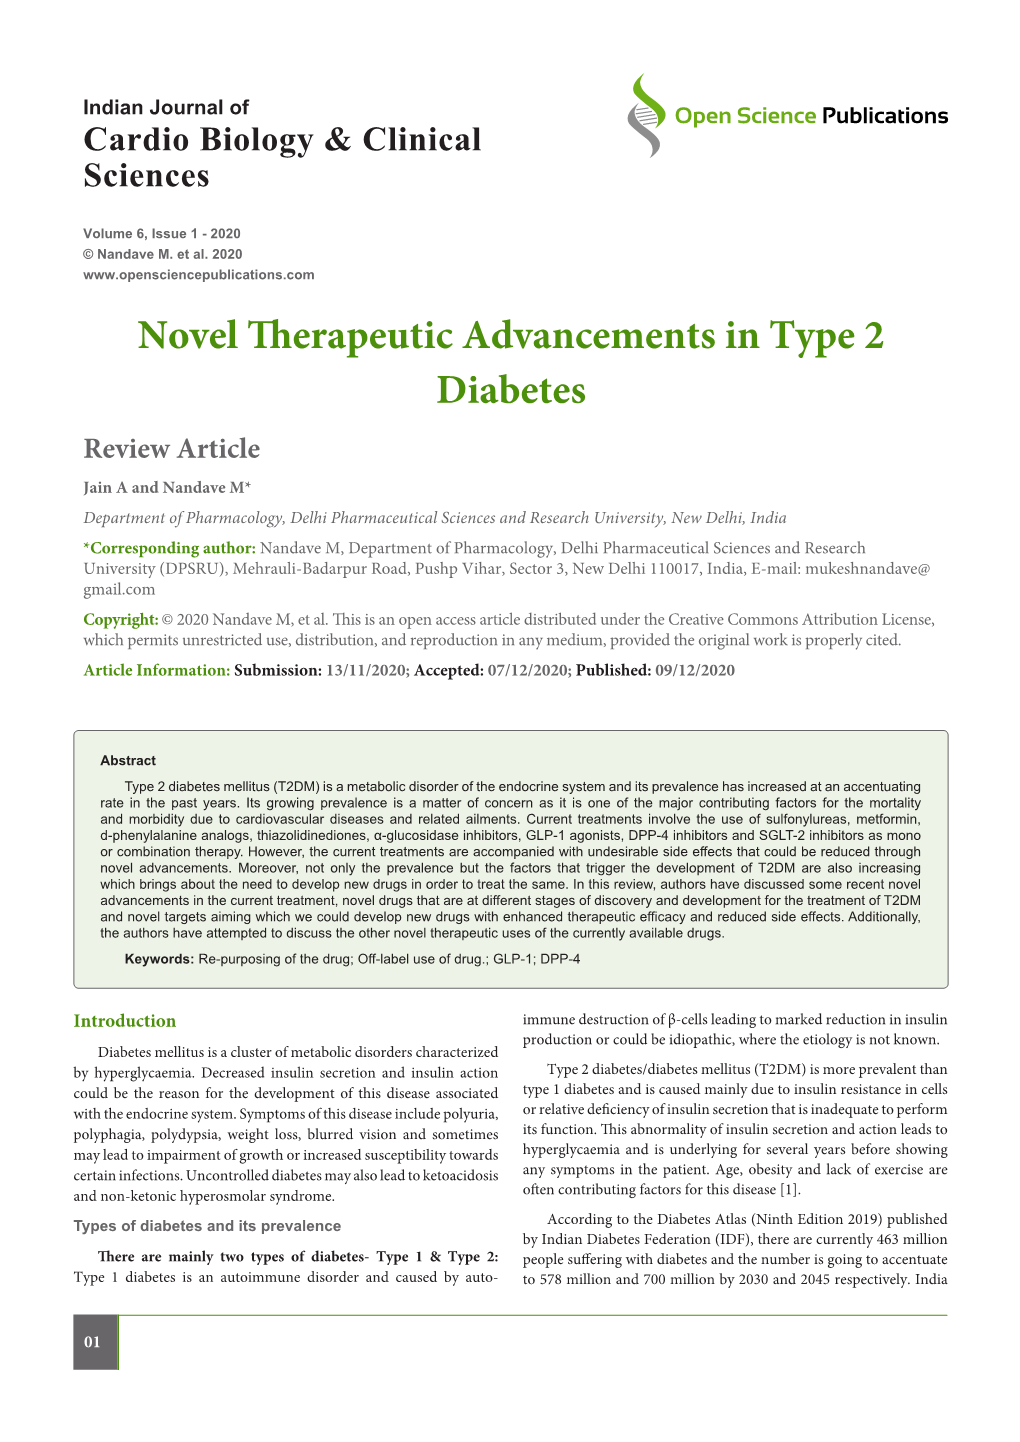 Novel Therapeutic Advancements in Type 2 Diabetes